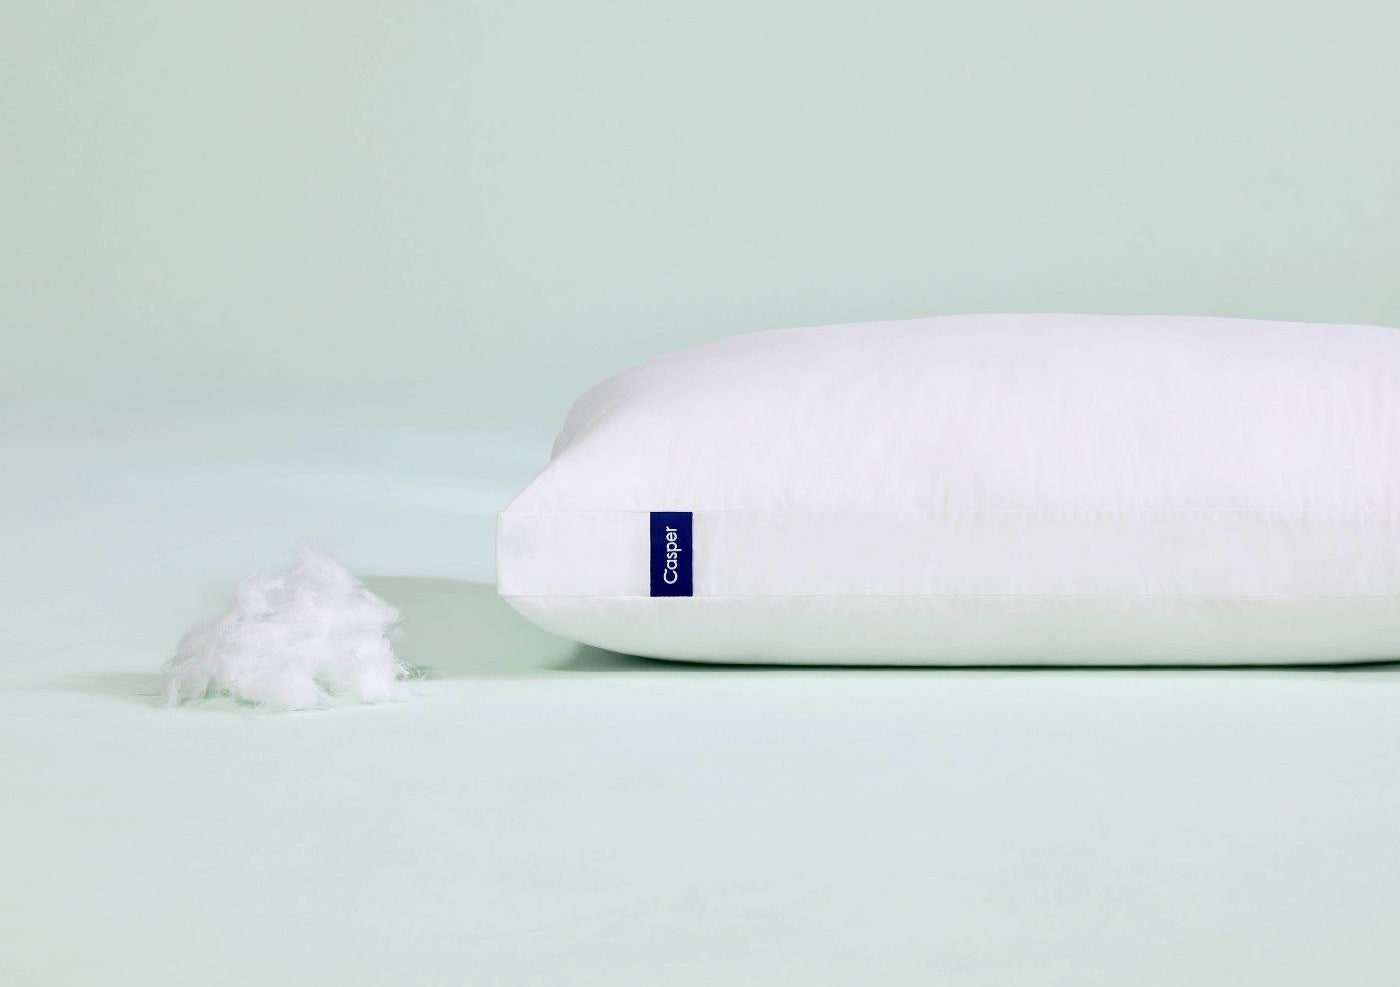 The Casper pillow next to a mound of stuffing to show its inside contents